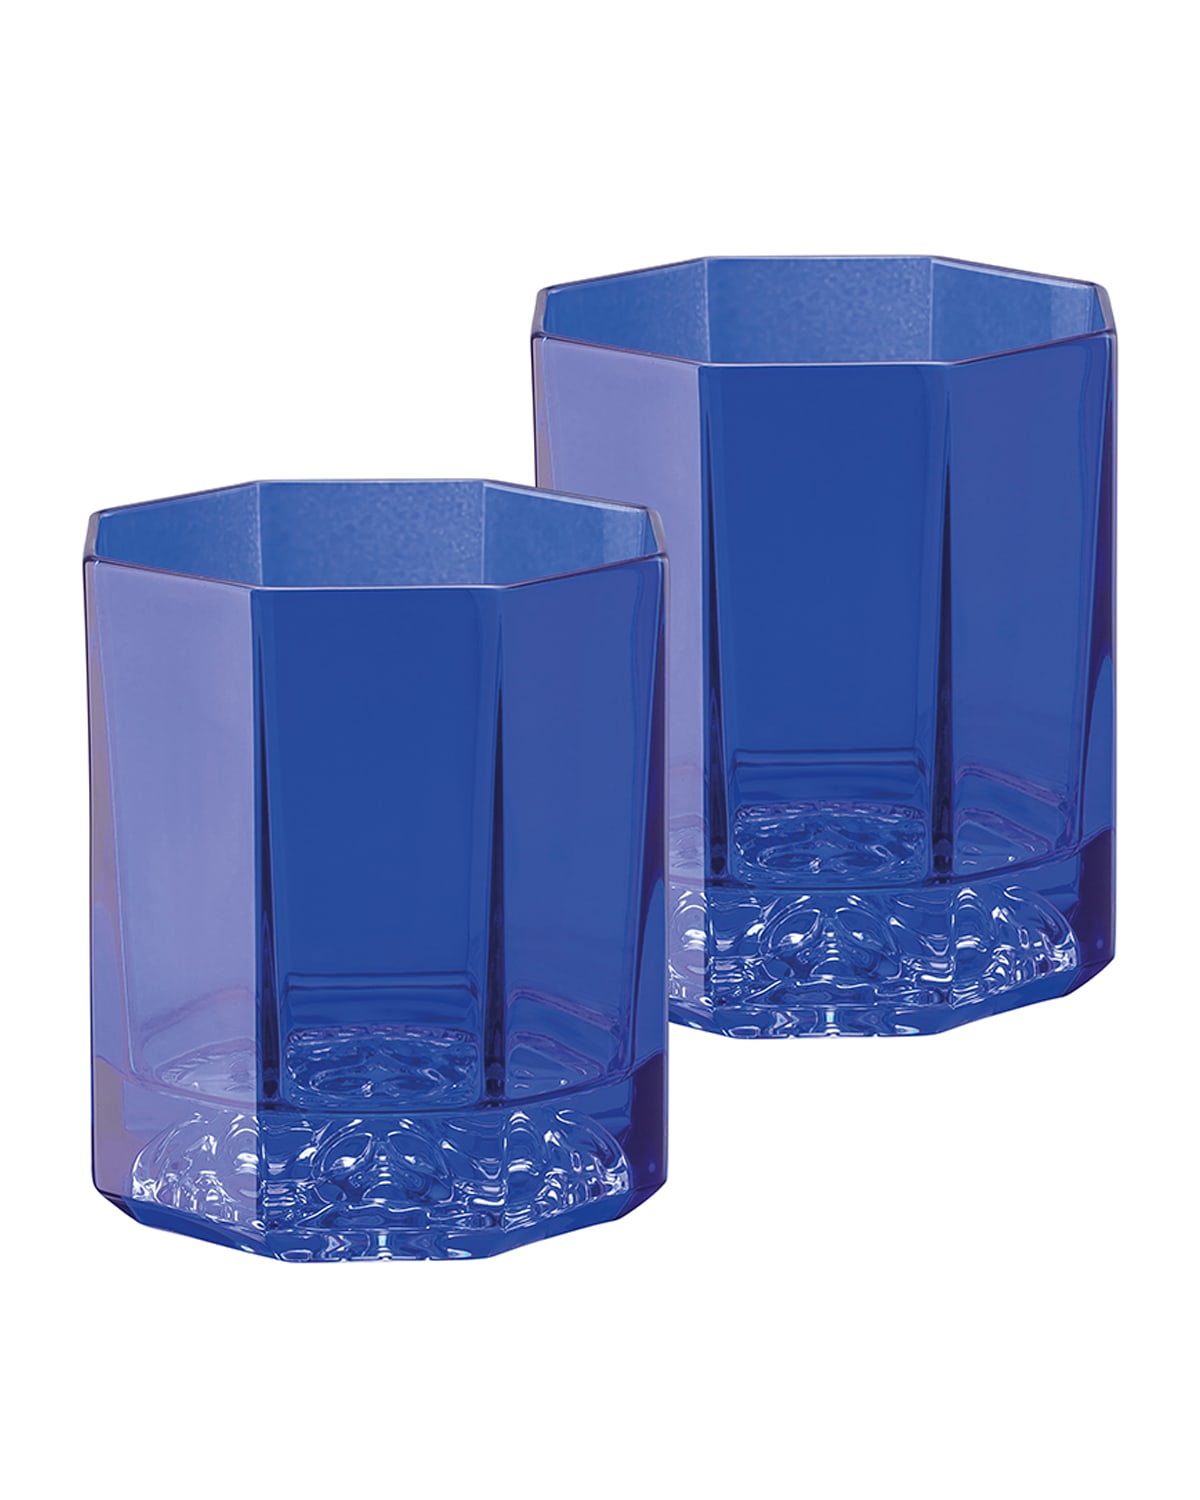 VERSACE MEDUSA LUMIERE BLUE WHISKEY DOUBLE OLD FASHIONED GLASSES, SET OF 2